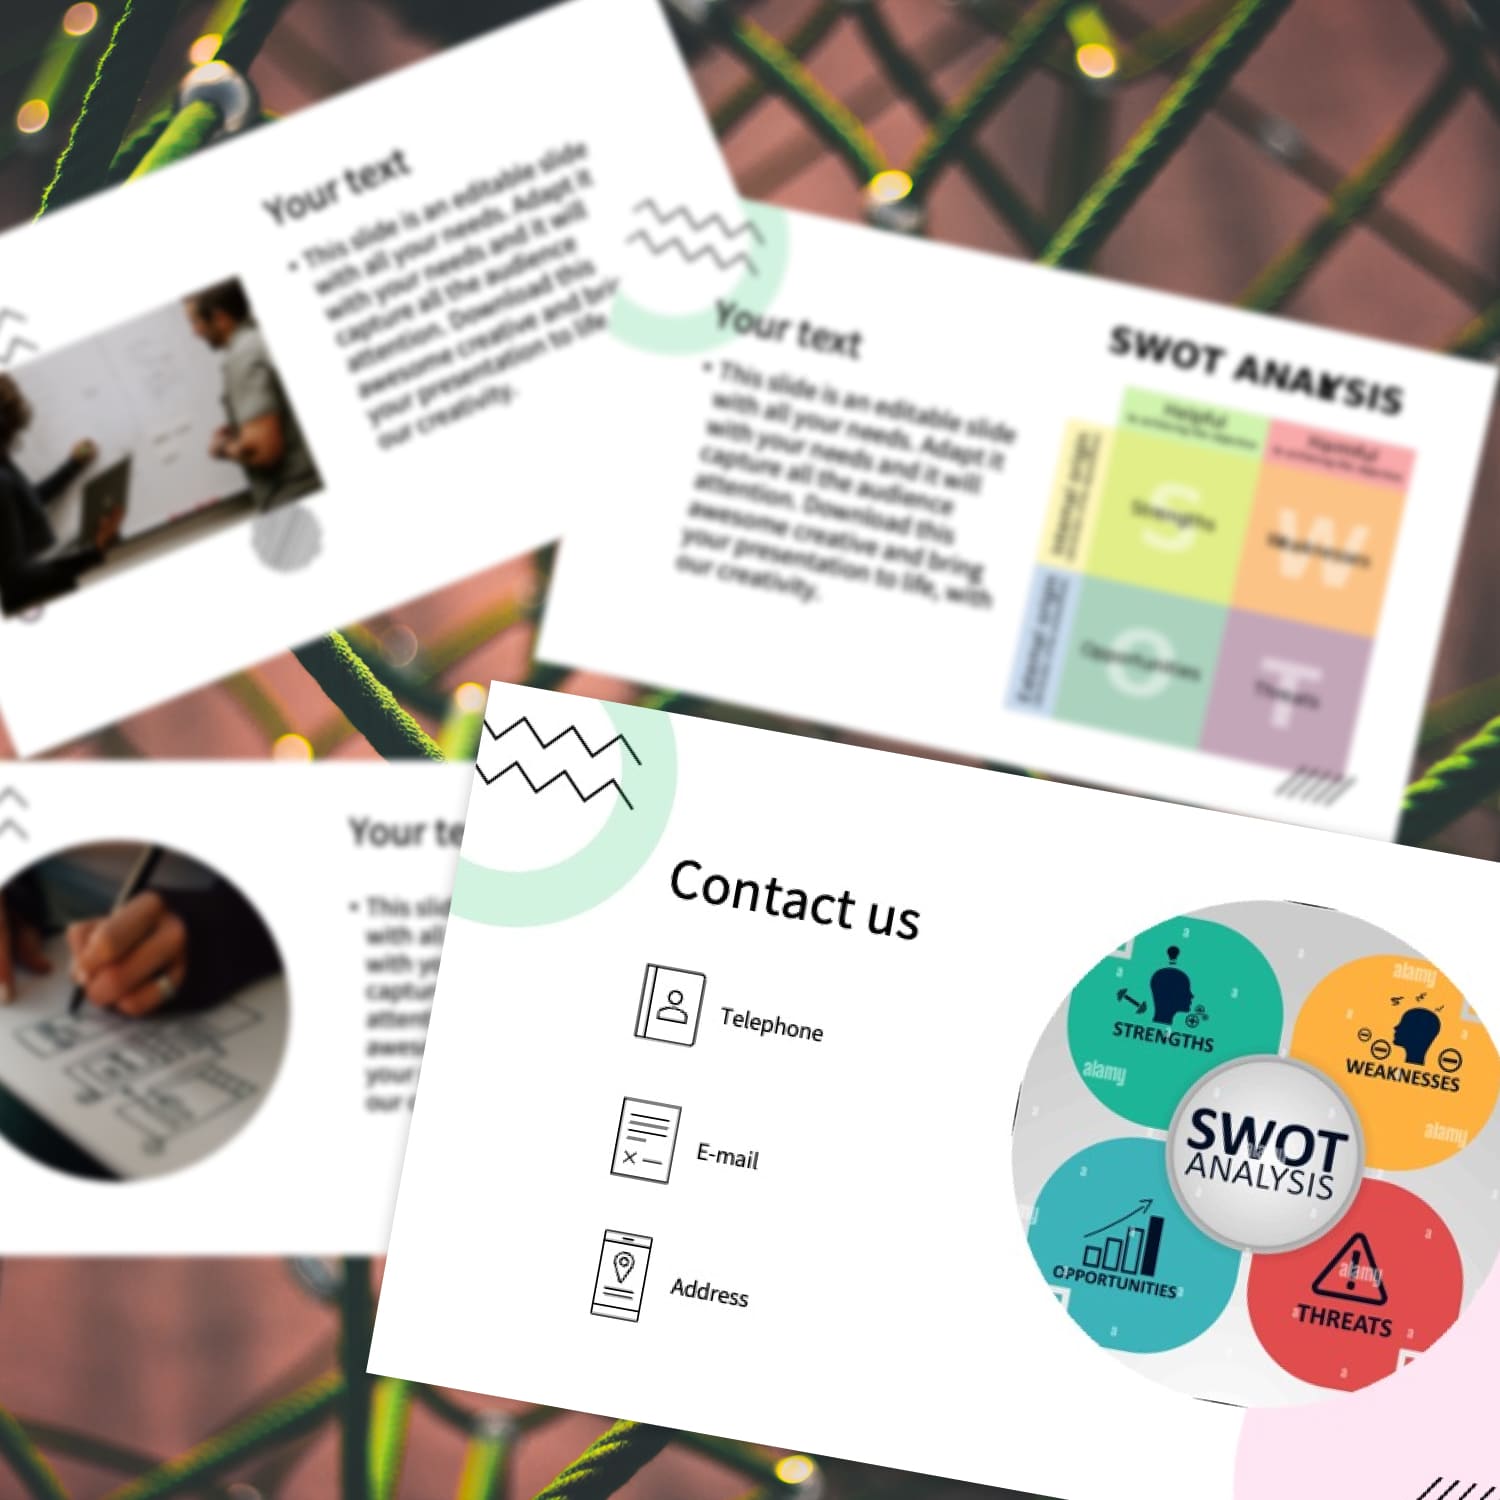 1500 2 SWOT Analysis Template Powerpoint Free.